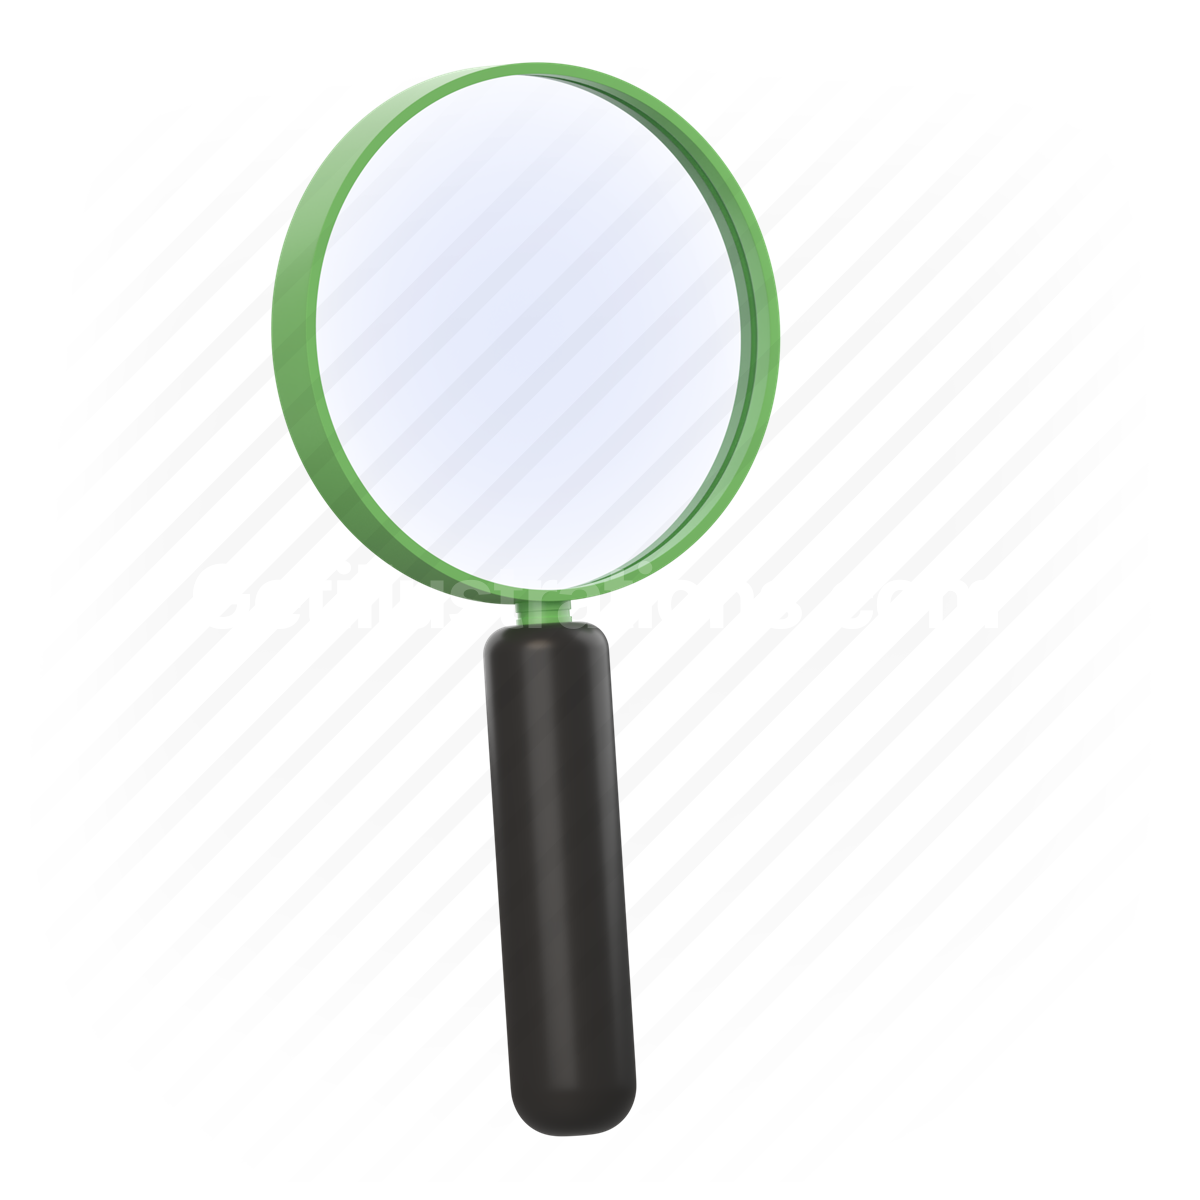 magnifier, searching, research, find, spyglass, scan